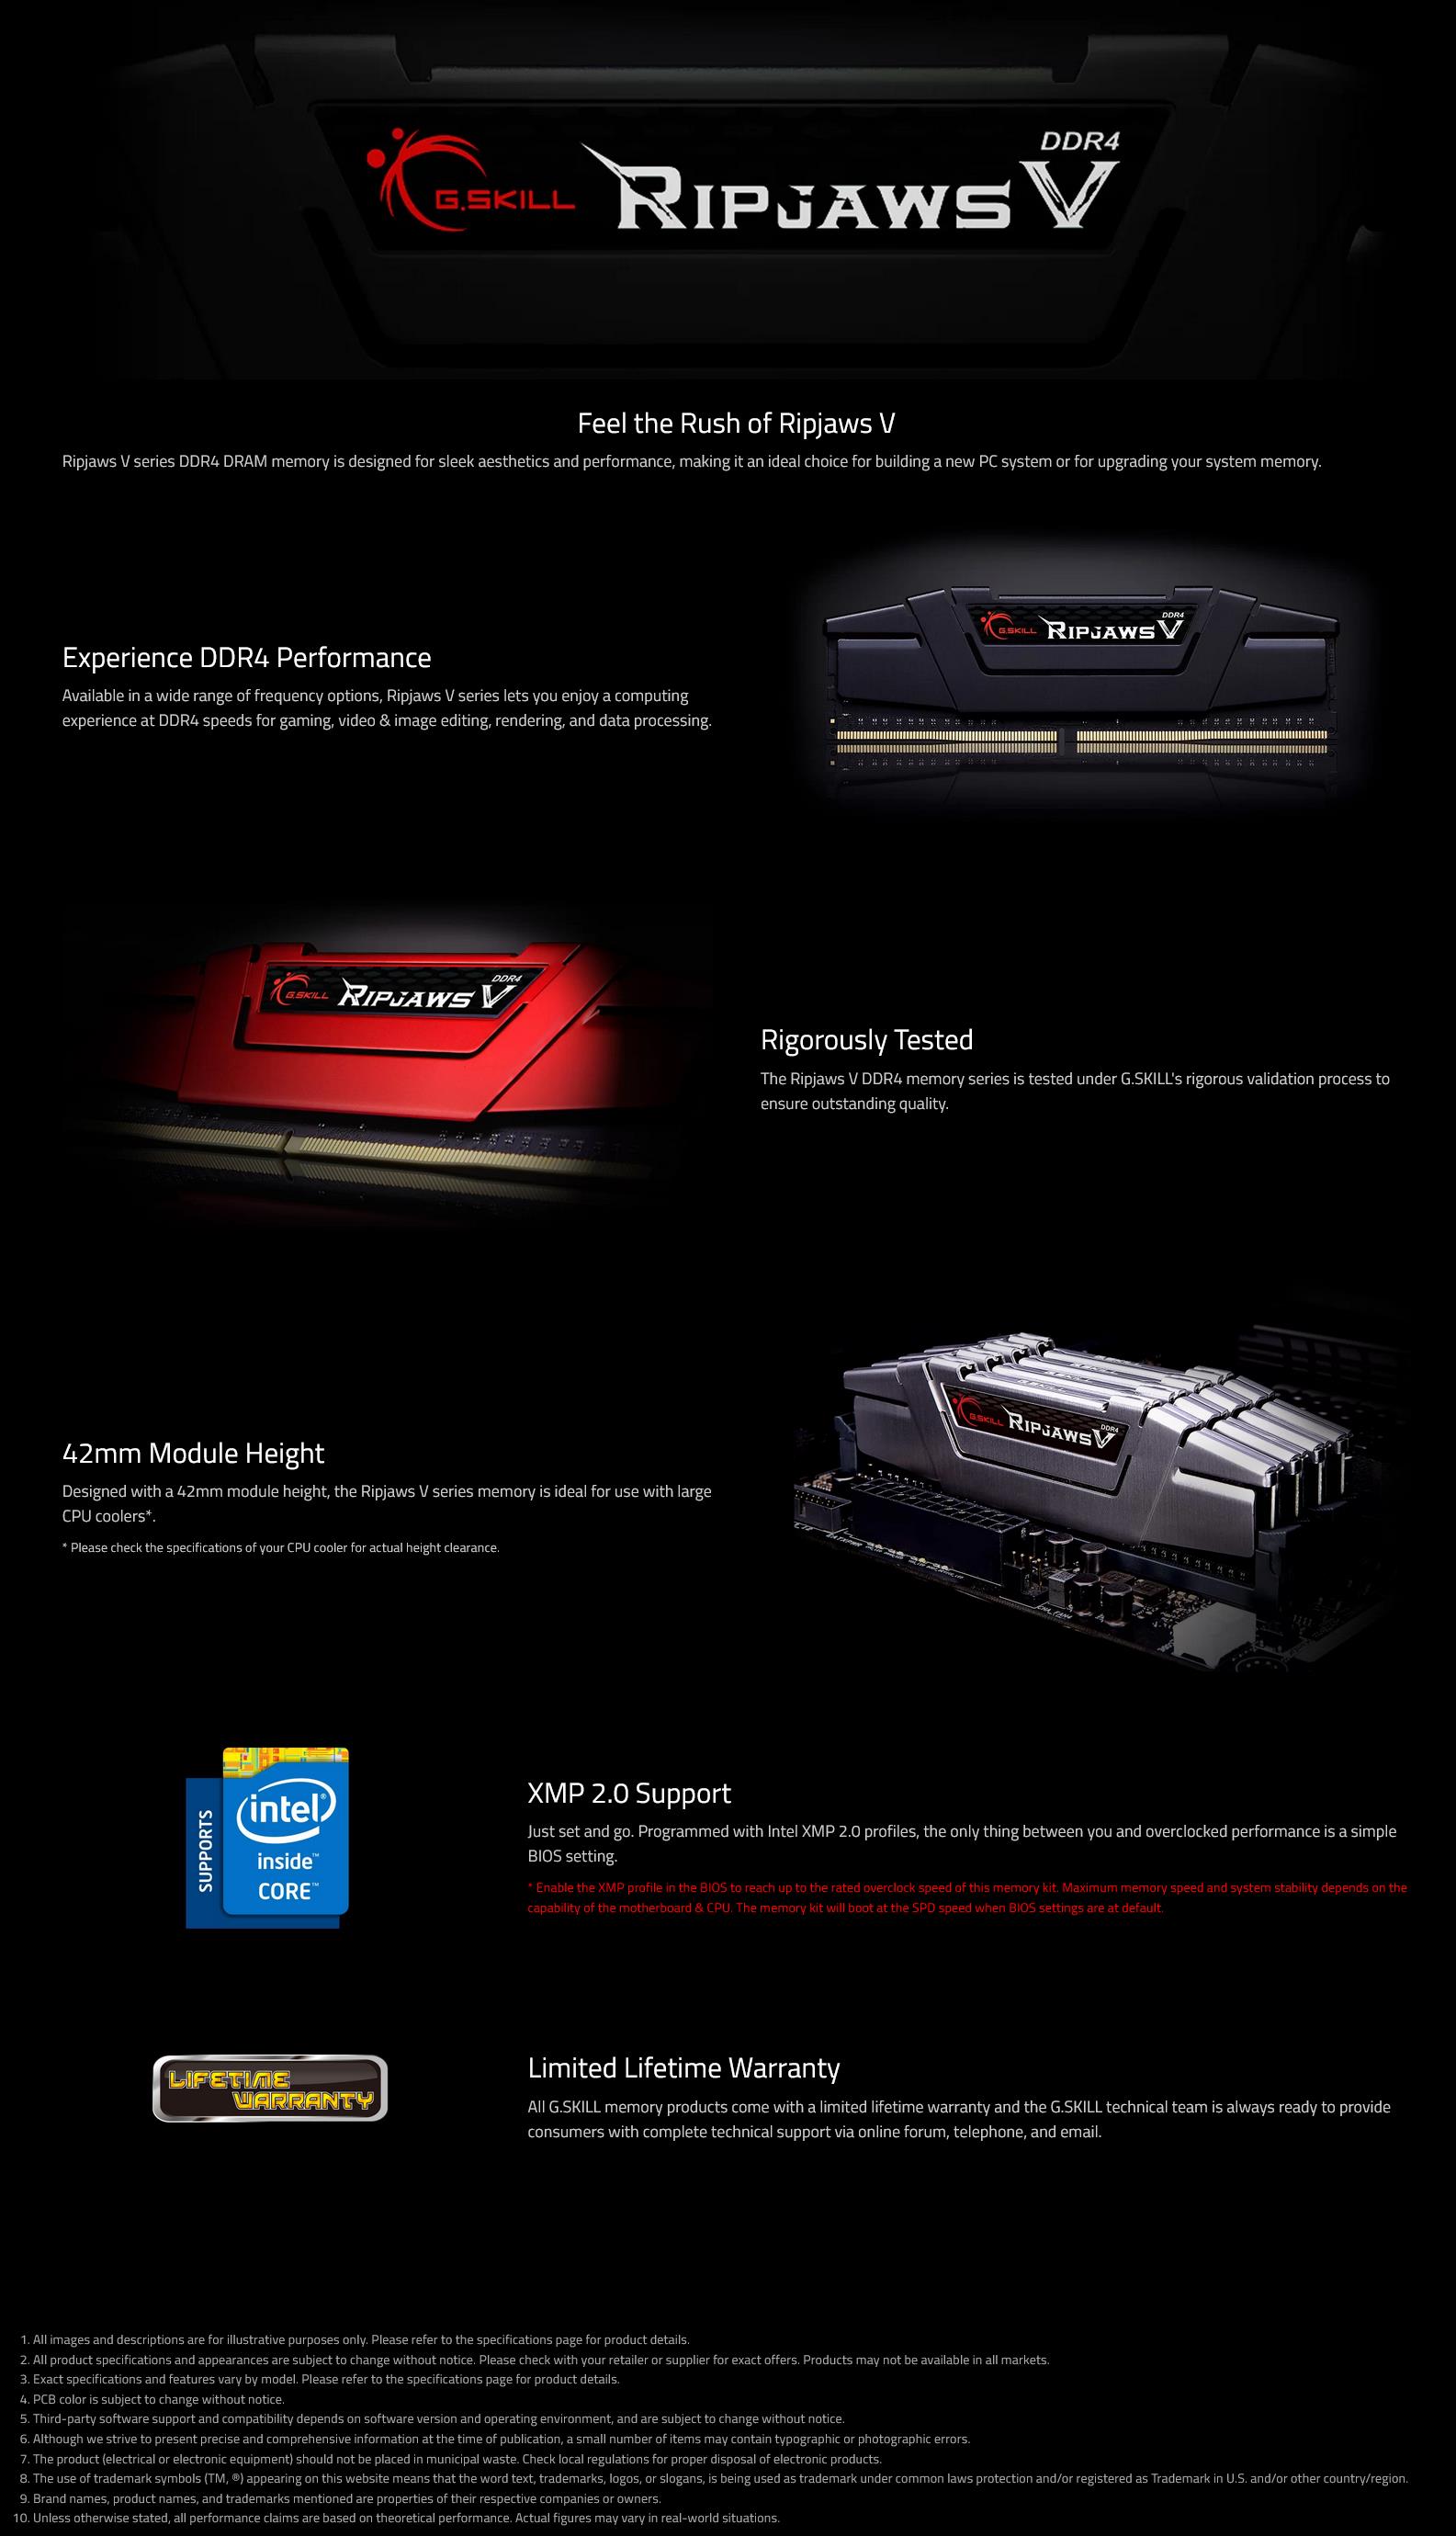 A large marketing image providing additional information about the product G.Skill 16GB Kit (2x8GB) DDR4 Ripjaws V C16 3600Mhz -  Black - Additional alt info not provided